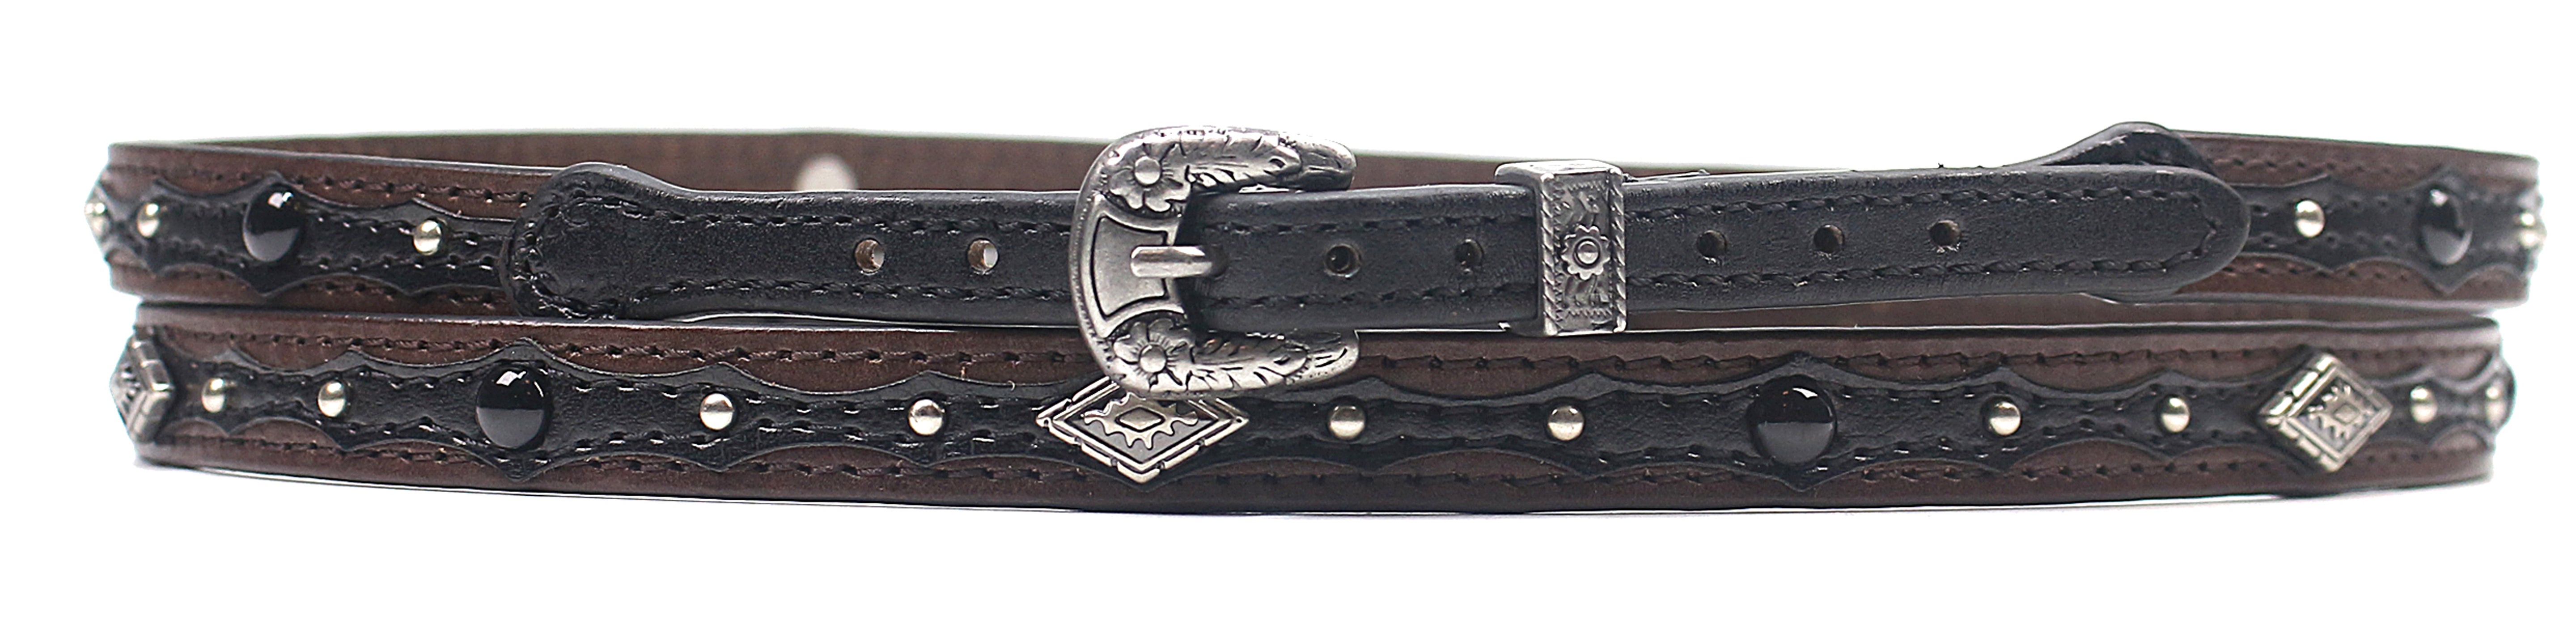 Western Hat Band for Cowboy Hats by Silver Canyon, Brown and Black Leather with Diamond Concho and Studs